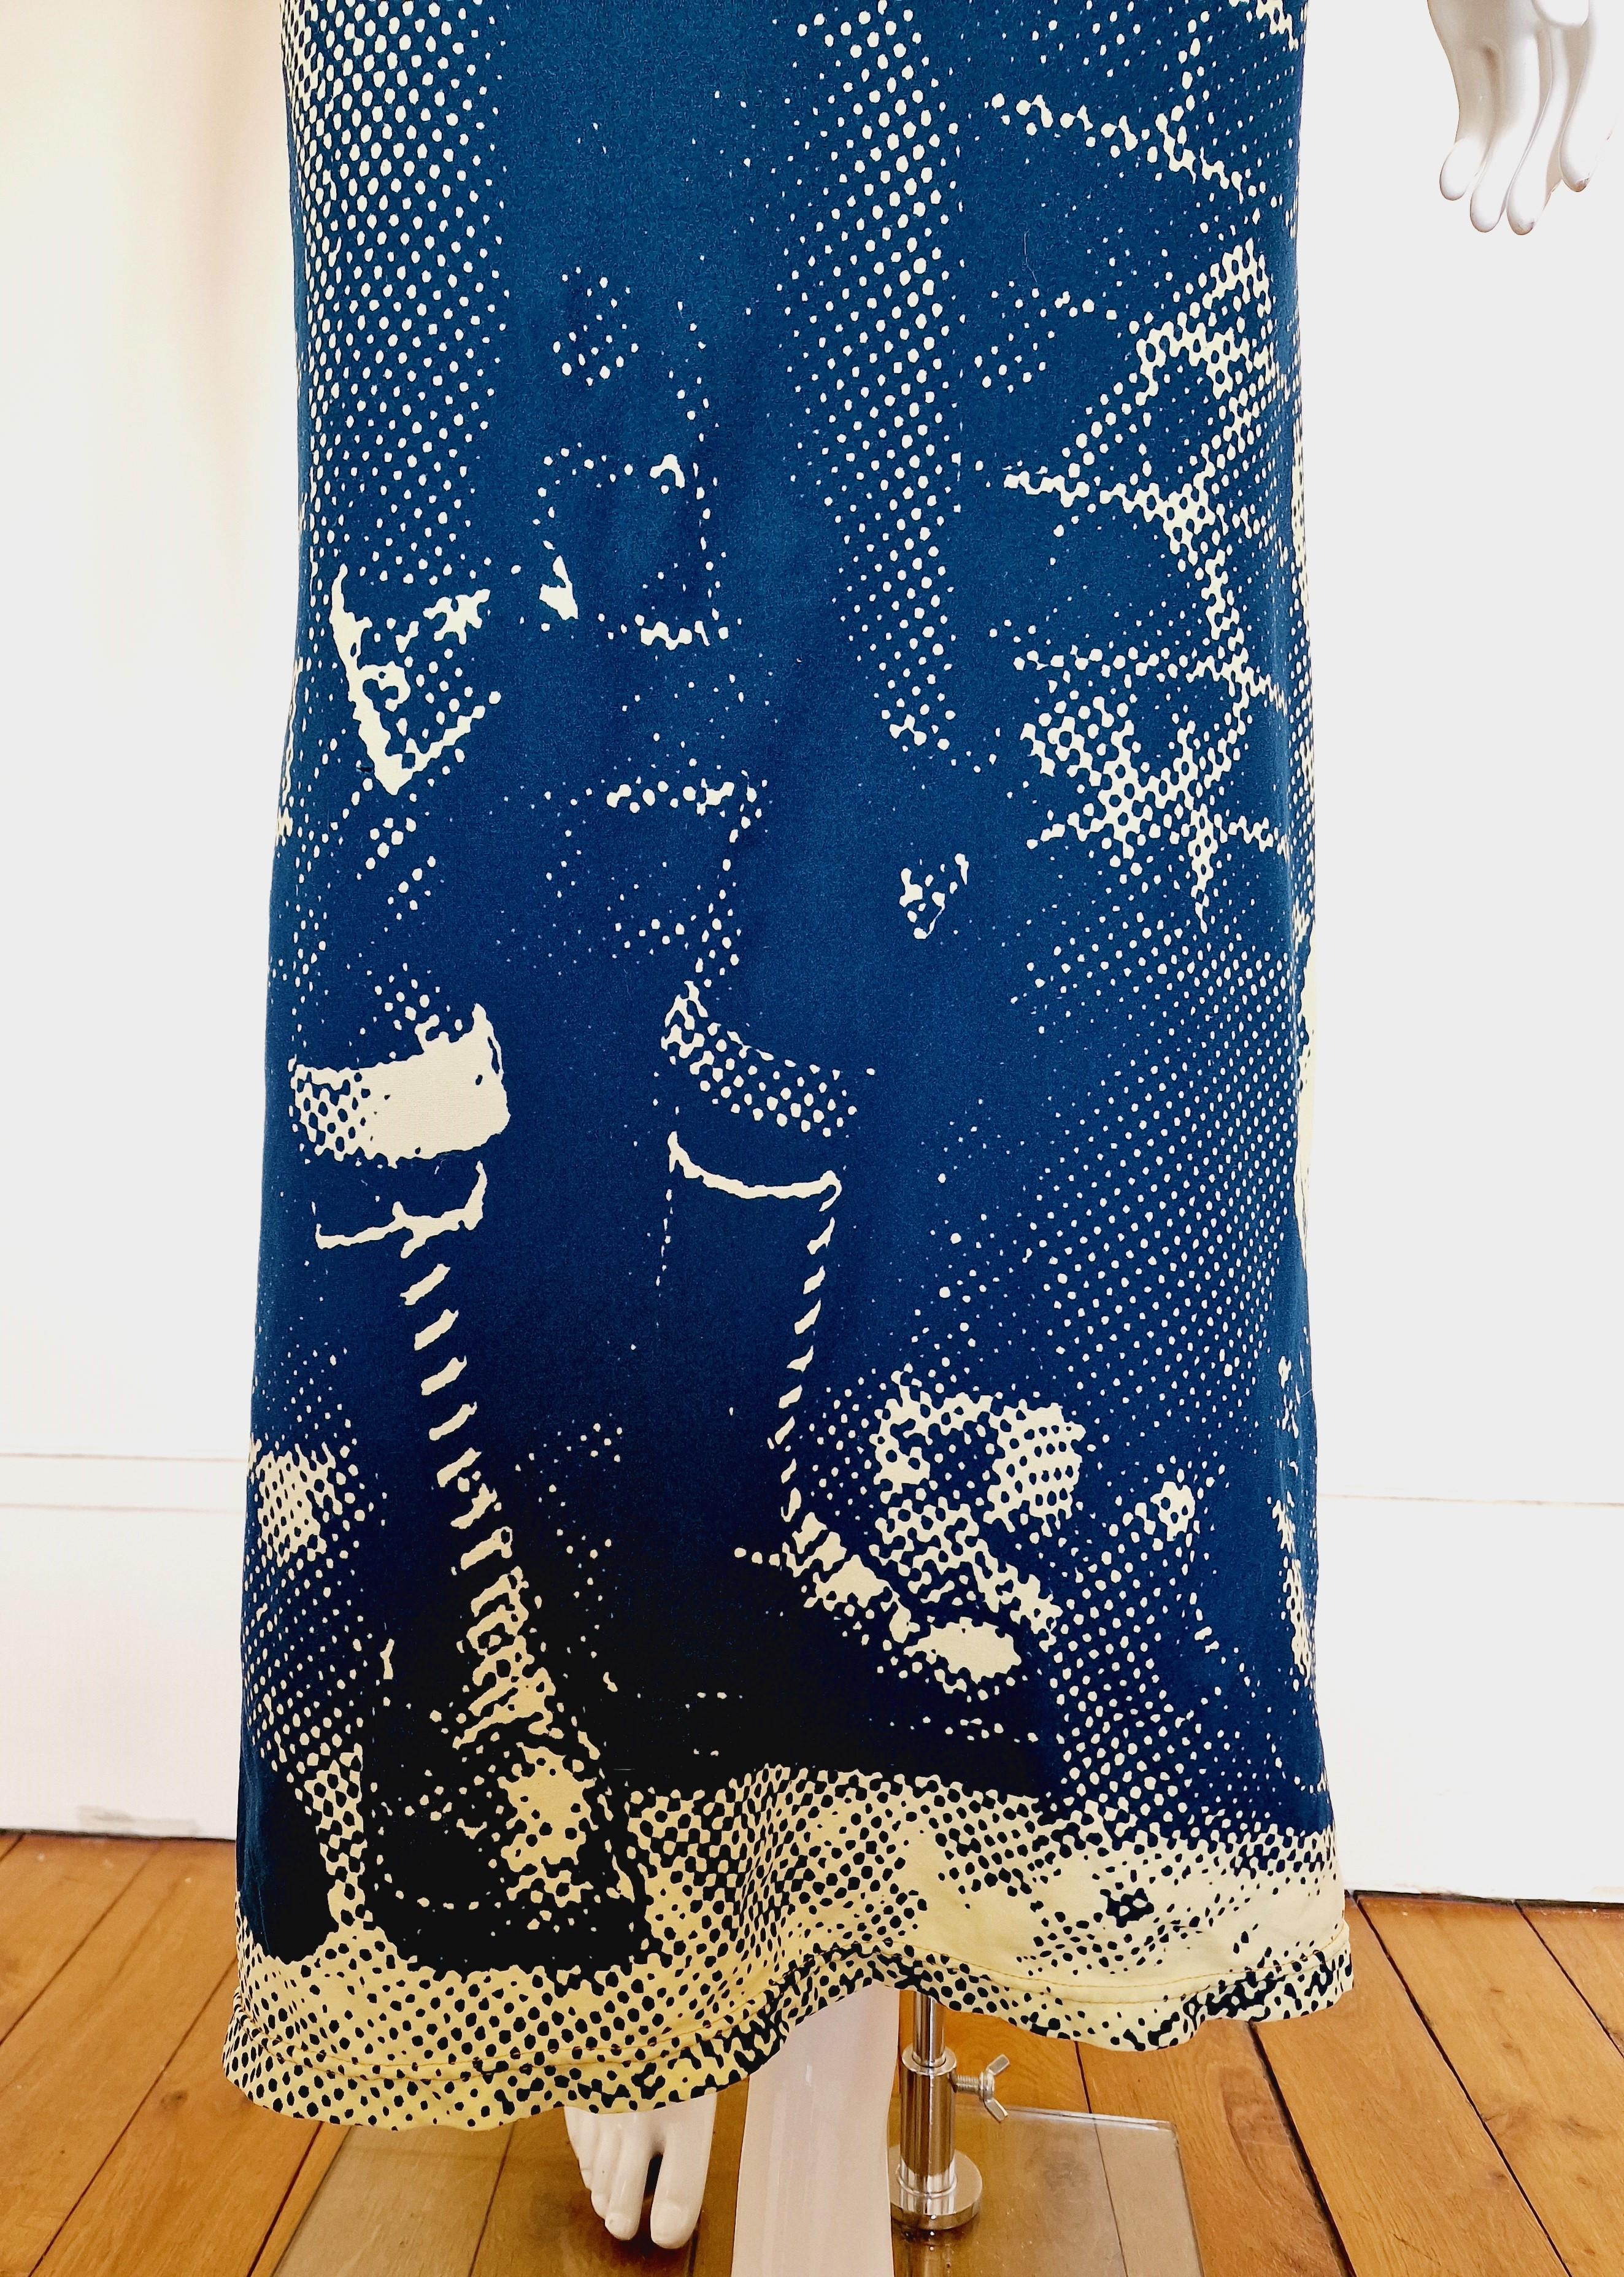 Jean Paul Gaultier Punk Fight Against Racism 1997 AW Print Tattoo Top Maxi Dress For Sale 1